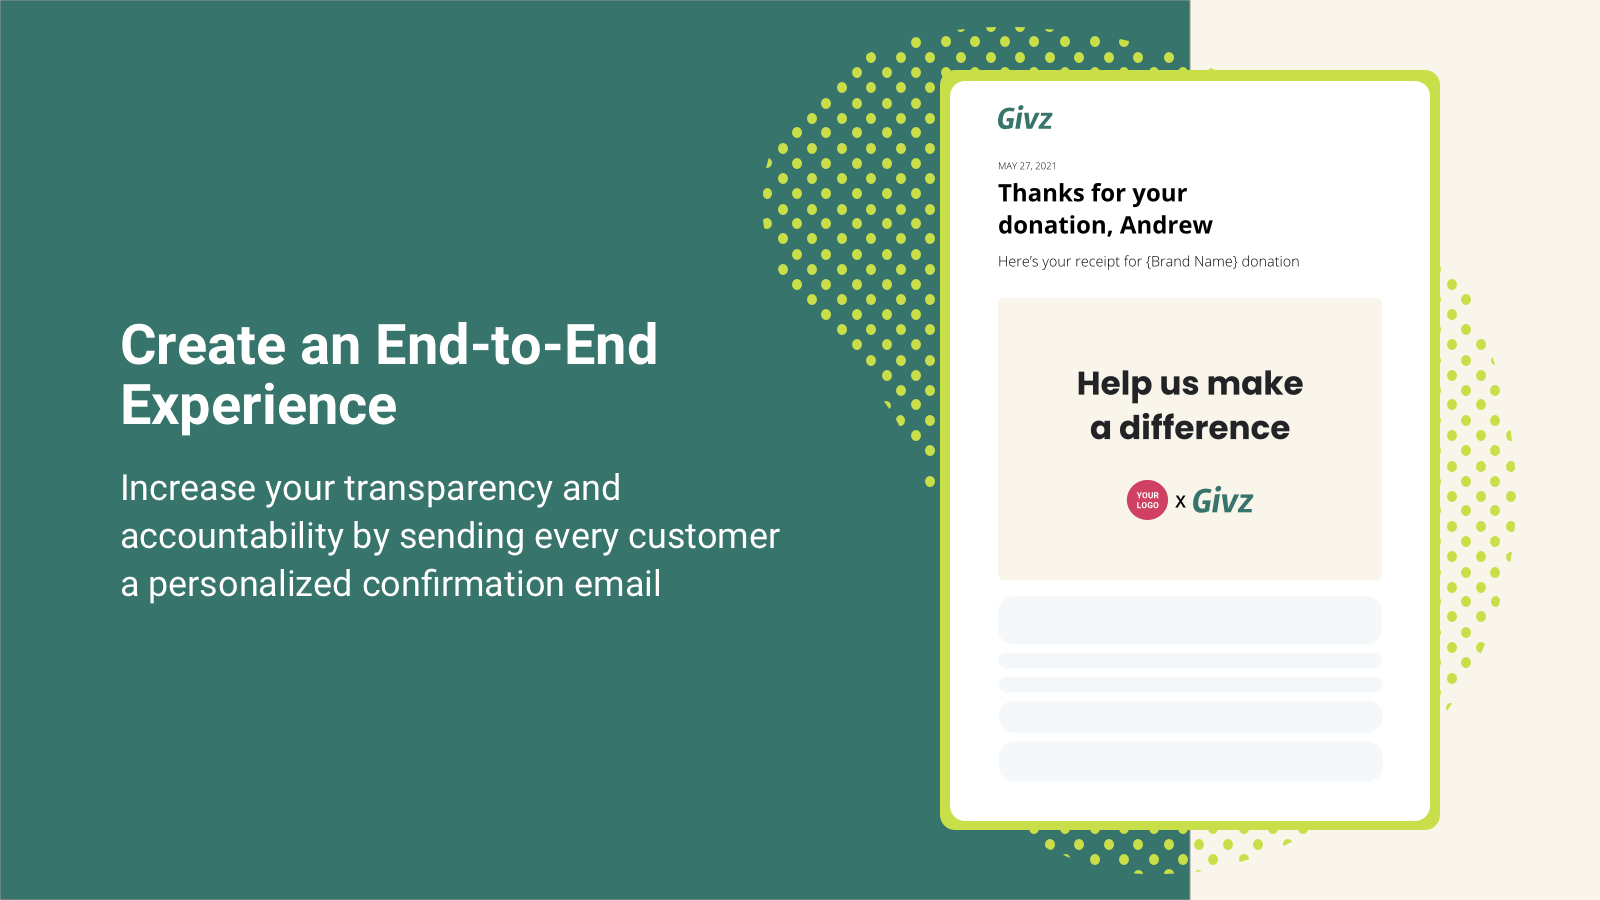 Get more trust by sending email receipt of donations to shoppers